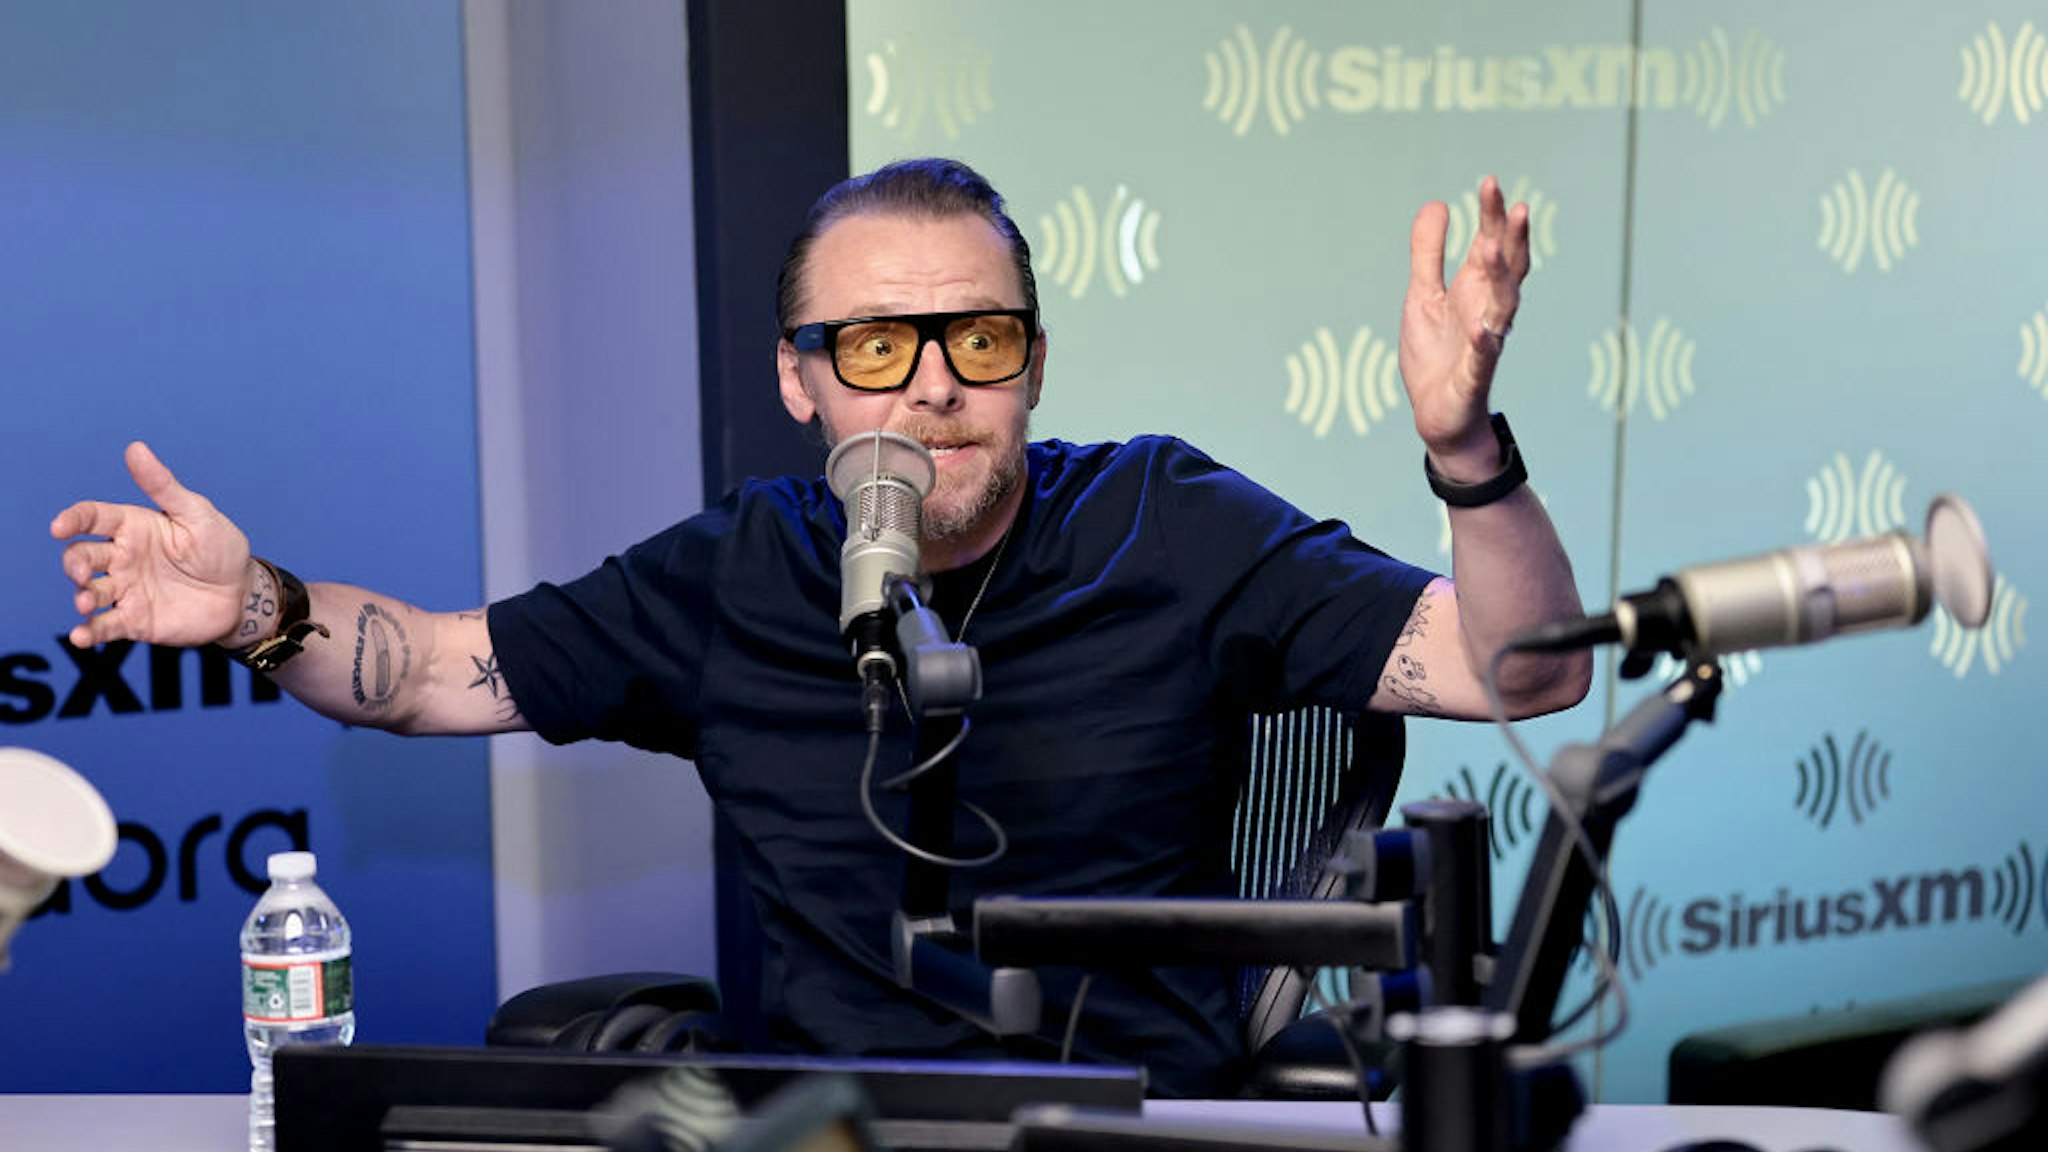 NEW YORK, NEW YORK - JULY 13: Simon Pegg visits SiriusXM at SiriusXM Studios on July 13, 2022 in New York City. (Photo by Jamie McCarthy/Getty Images)